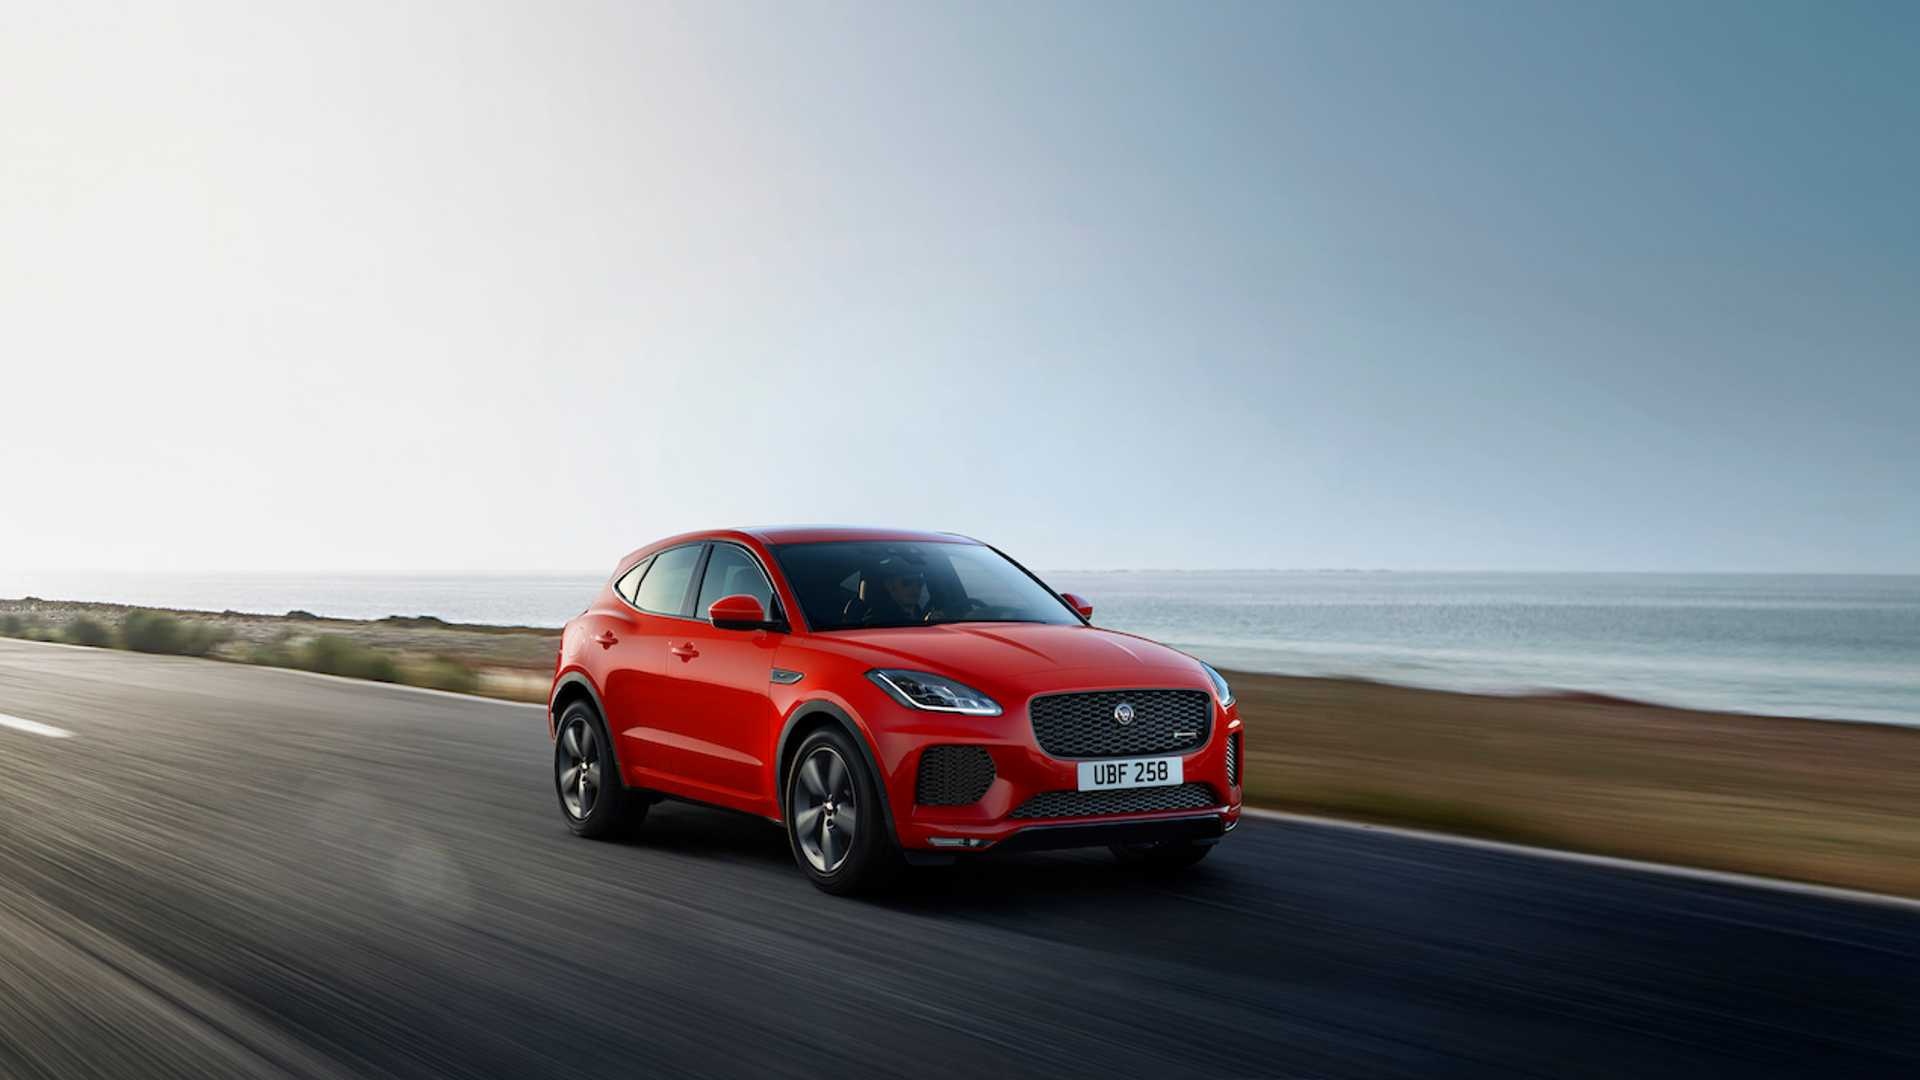 Jaguar E-PACE, Flagship edition, Stylish and dynamic, Attention to detail, 1920x1080 Full HD Desktop